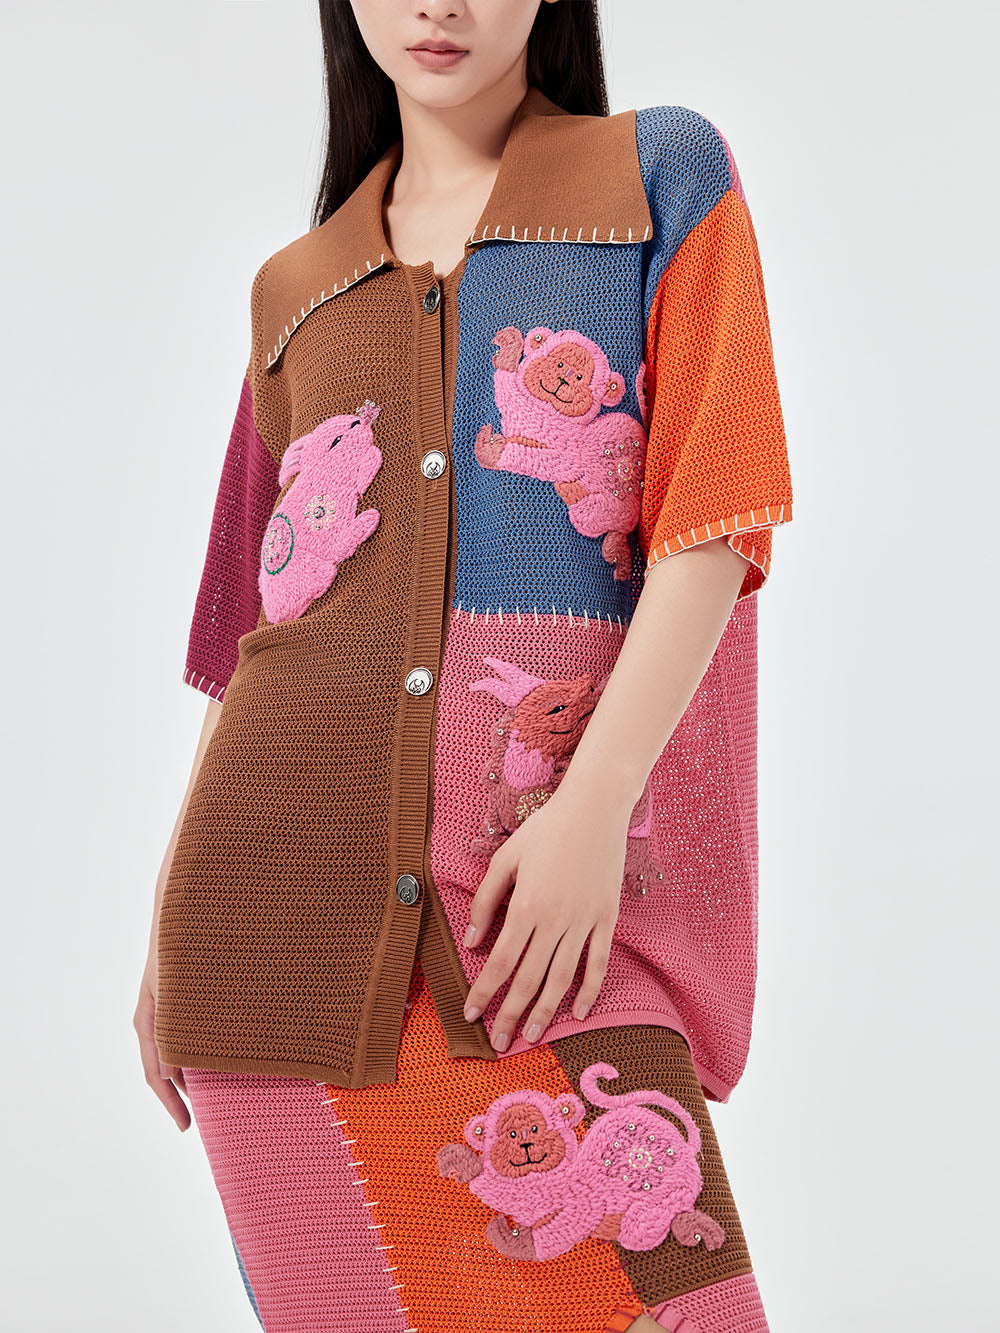 MUKZIN Multi-color Patchwork Knitted Shirt